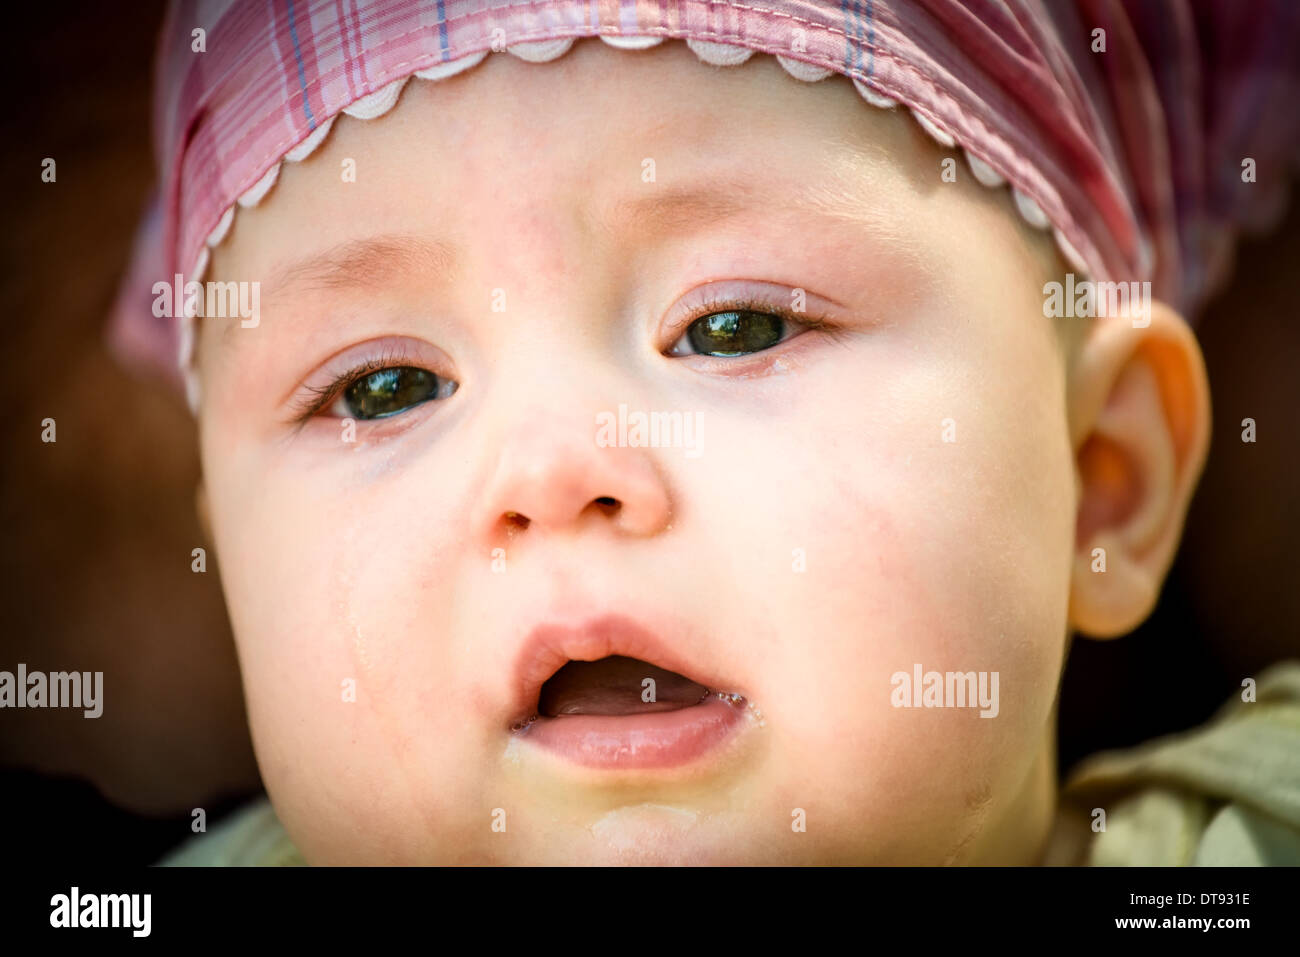 Unhappy baby portrait - detail of face, tears visible Stock Photo